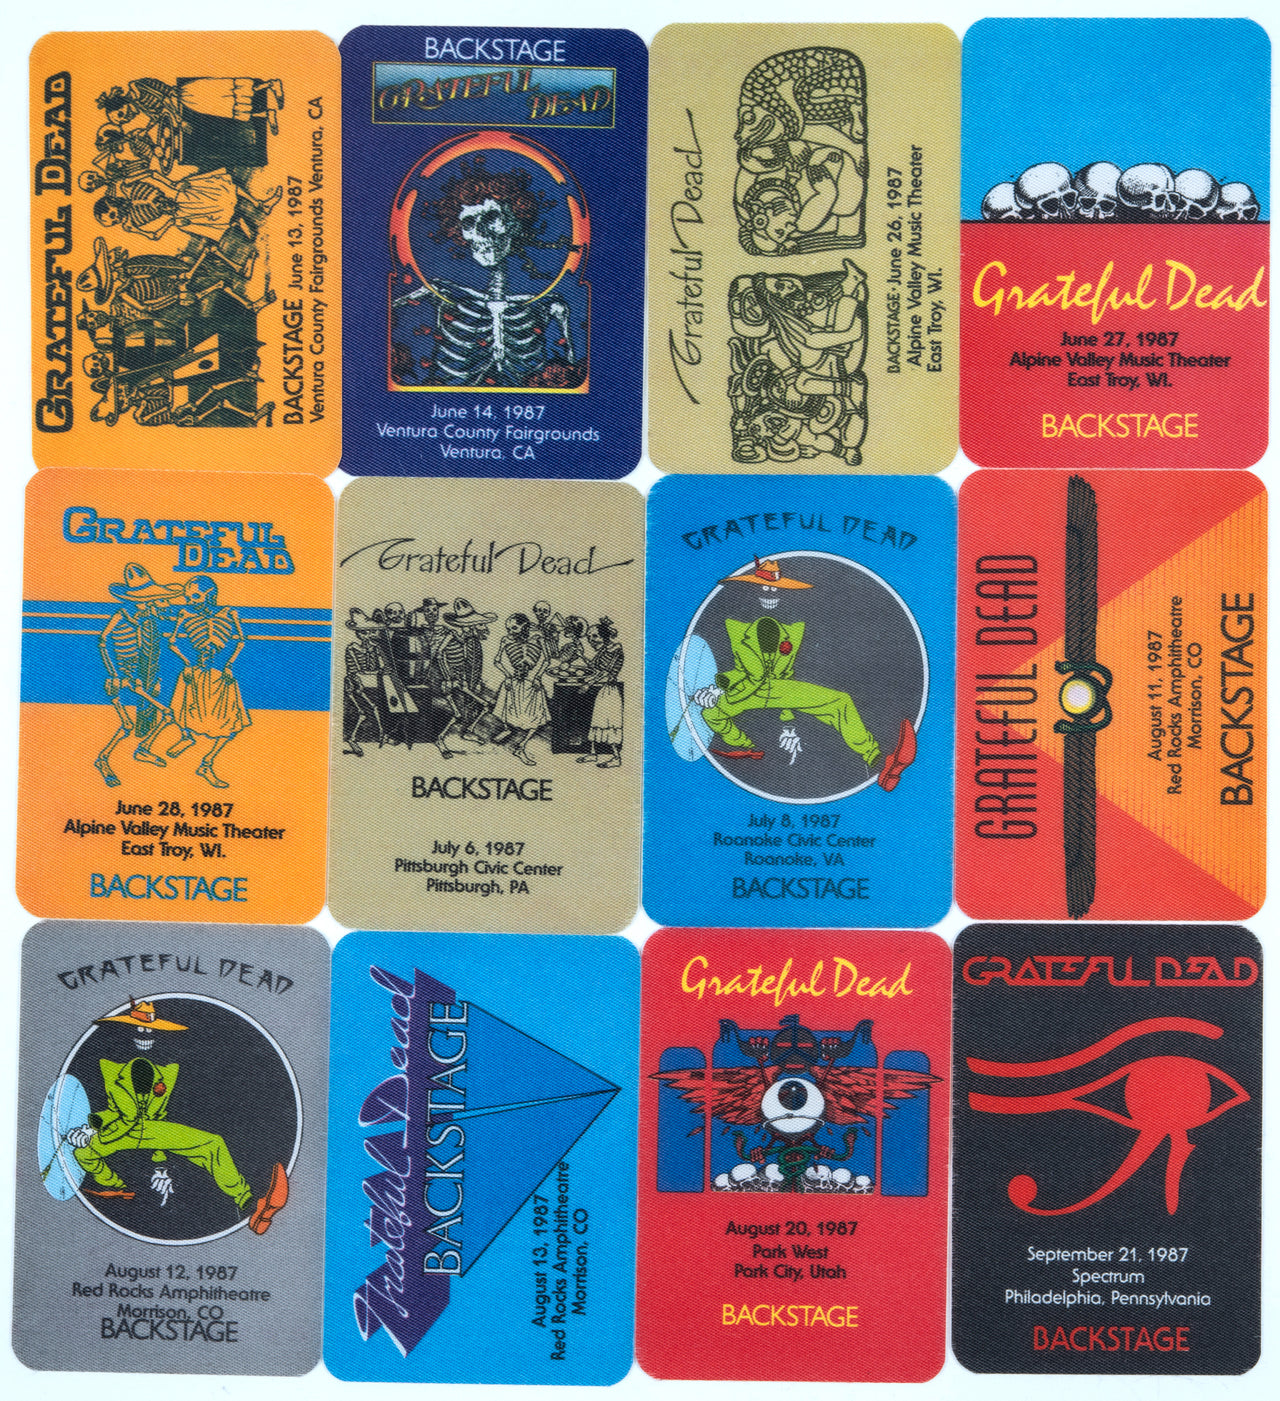 Grateful Dead Backstage Passes (6/13/1987 - 9/21/1987) from Dan Healy